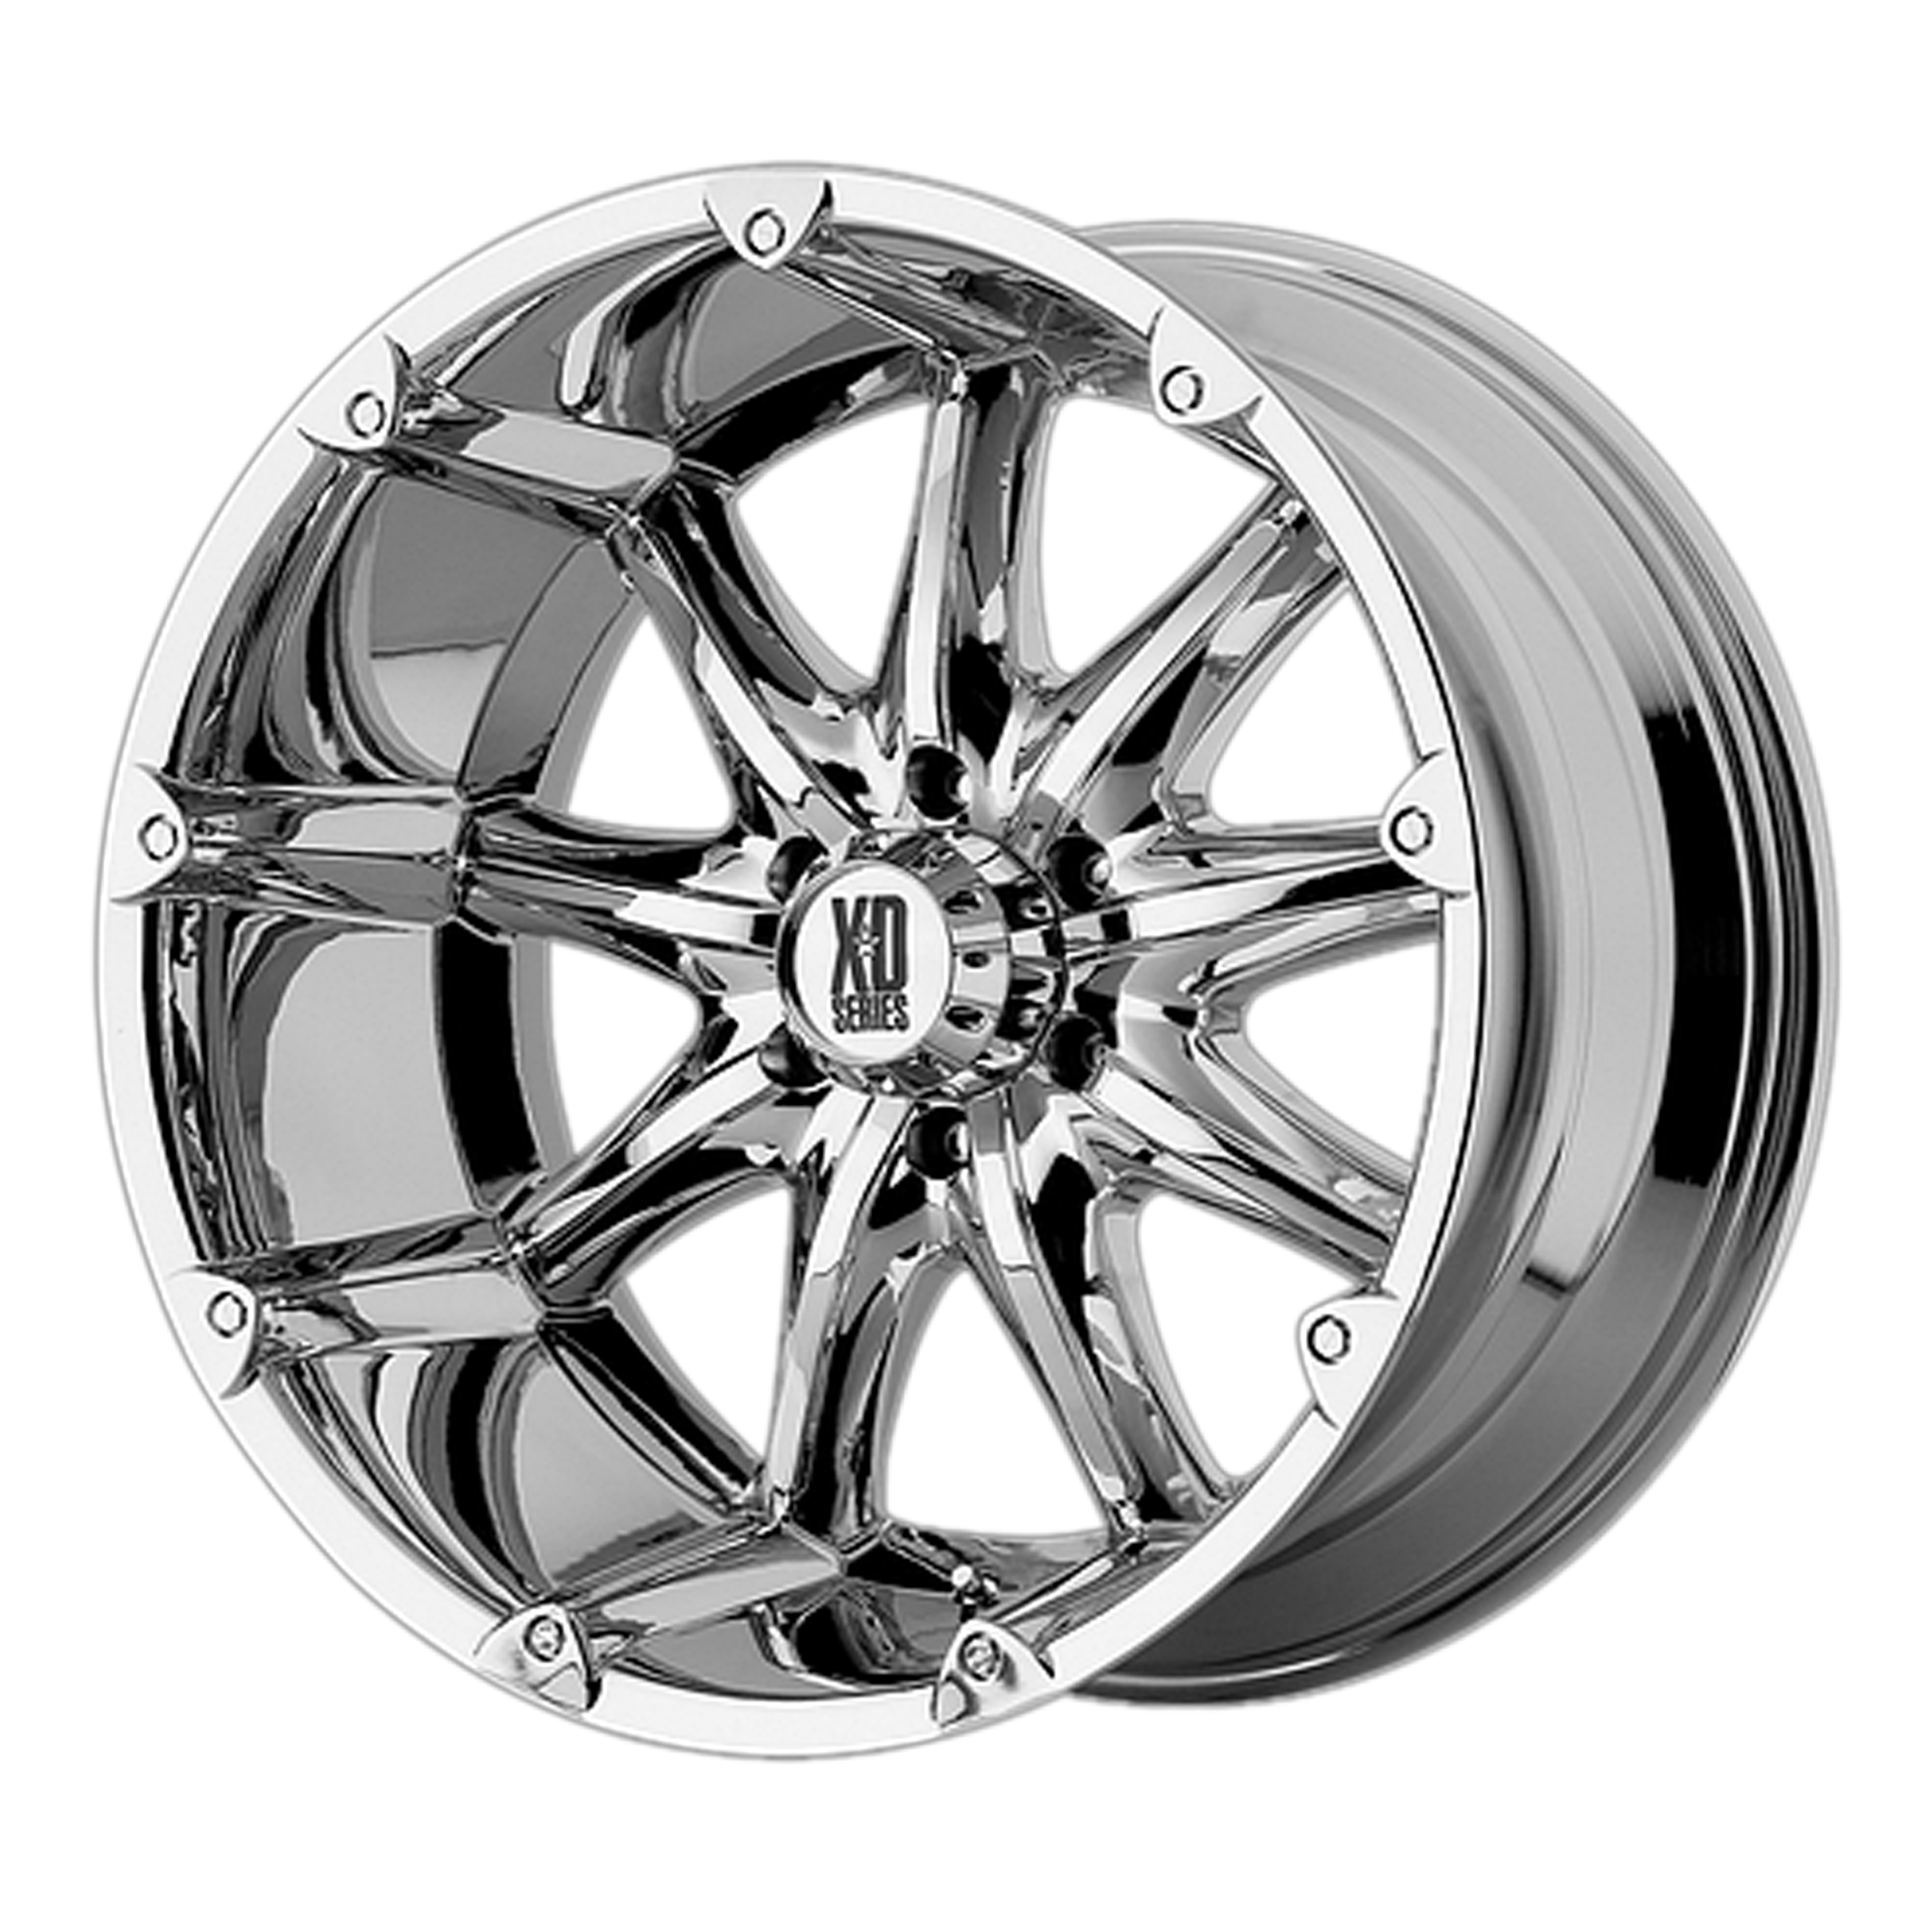 BADLANDS 20x9 8x170.00 CHROME (-12 mm) - Tires and Engine Performance